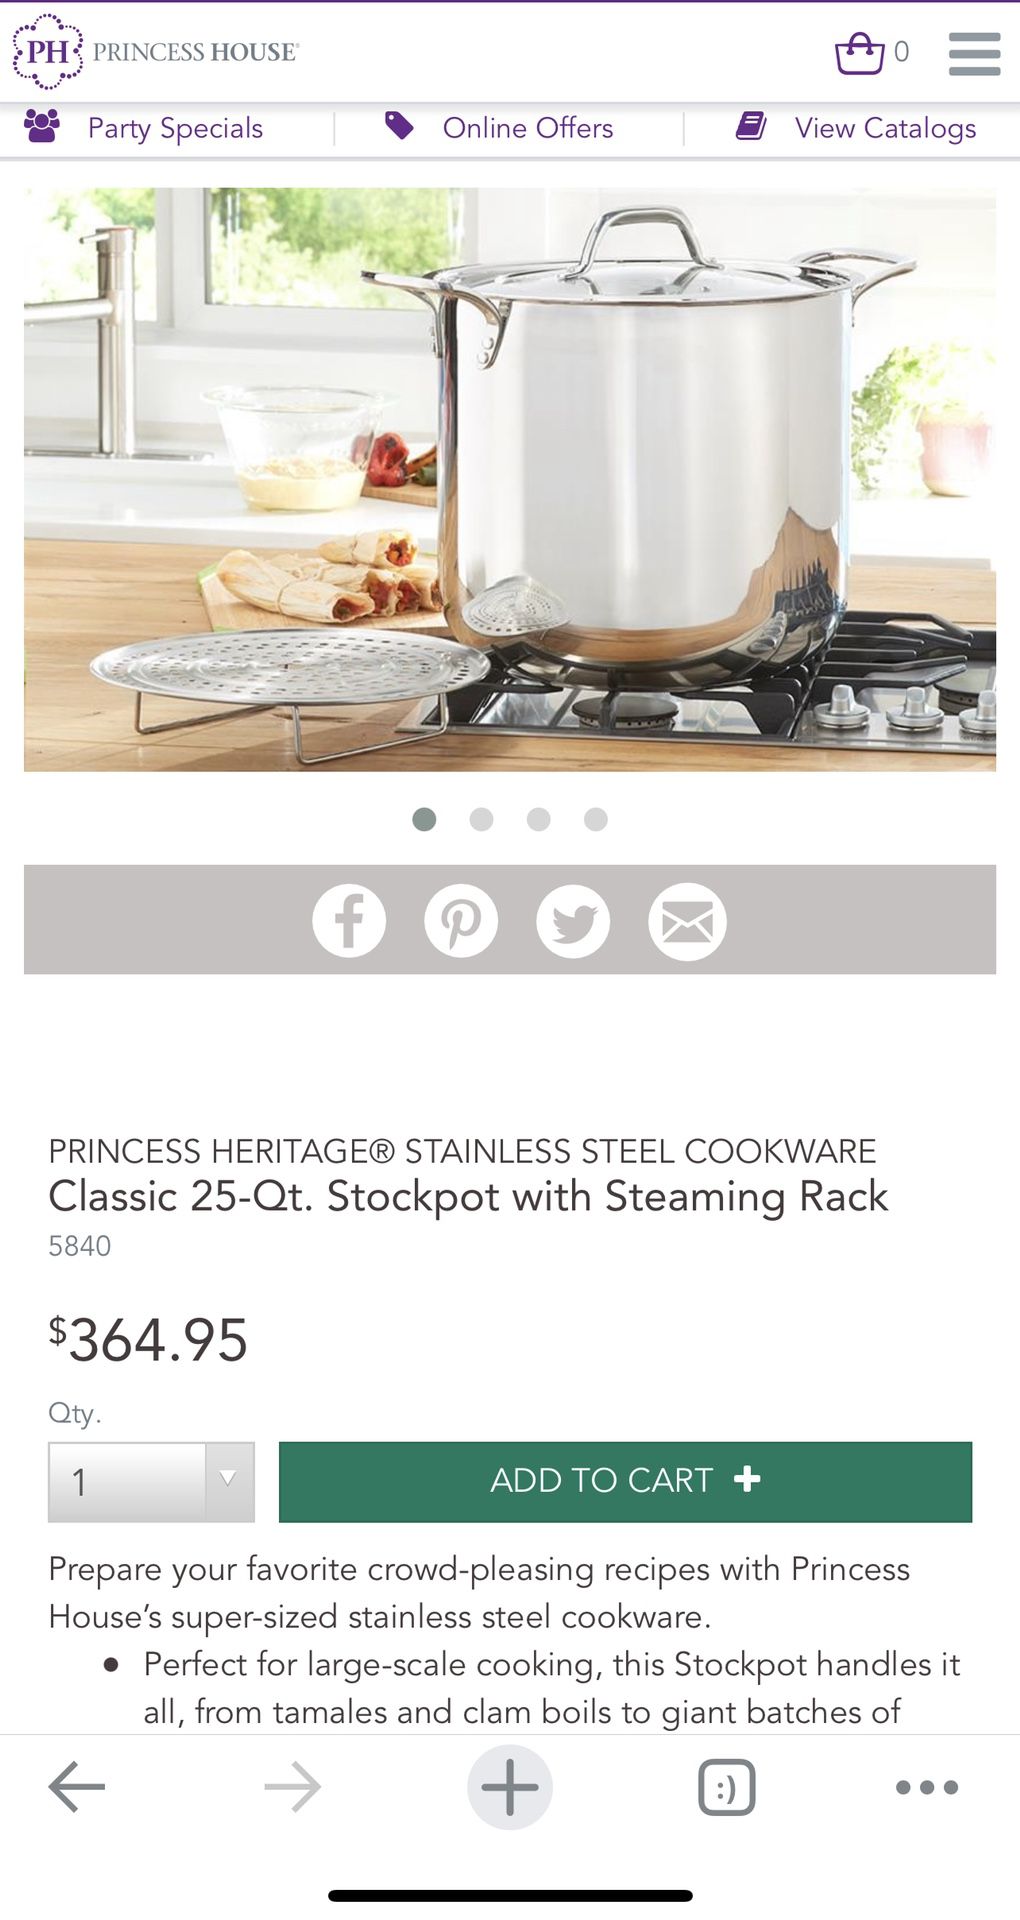 Princess House Heritage Signature 15-Qt. Stockpot with Steaming Rack (3681)  New!